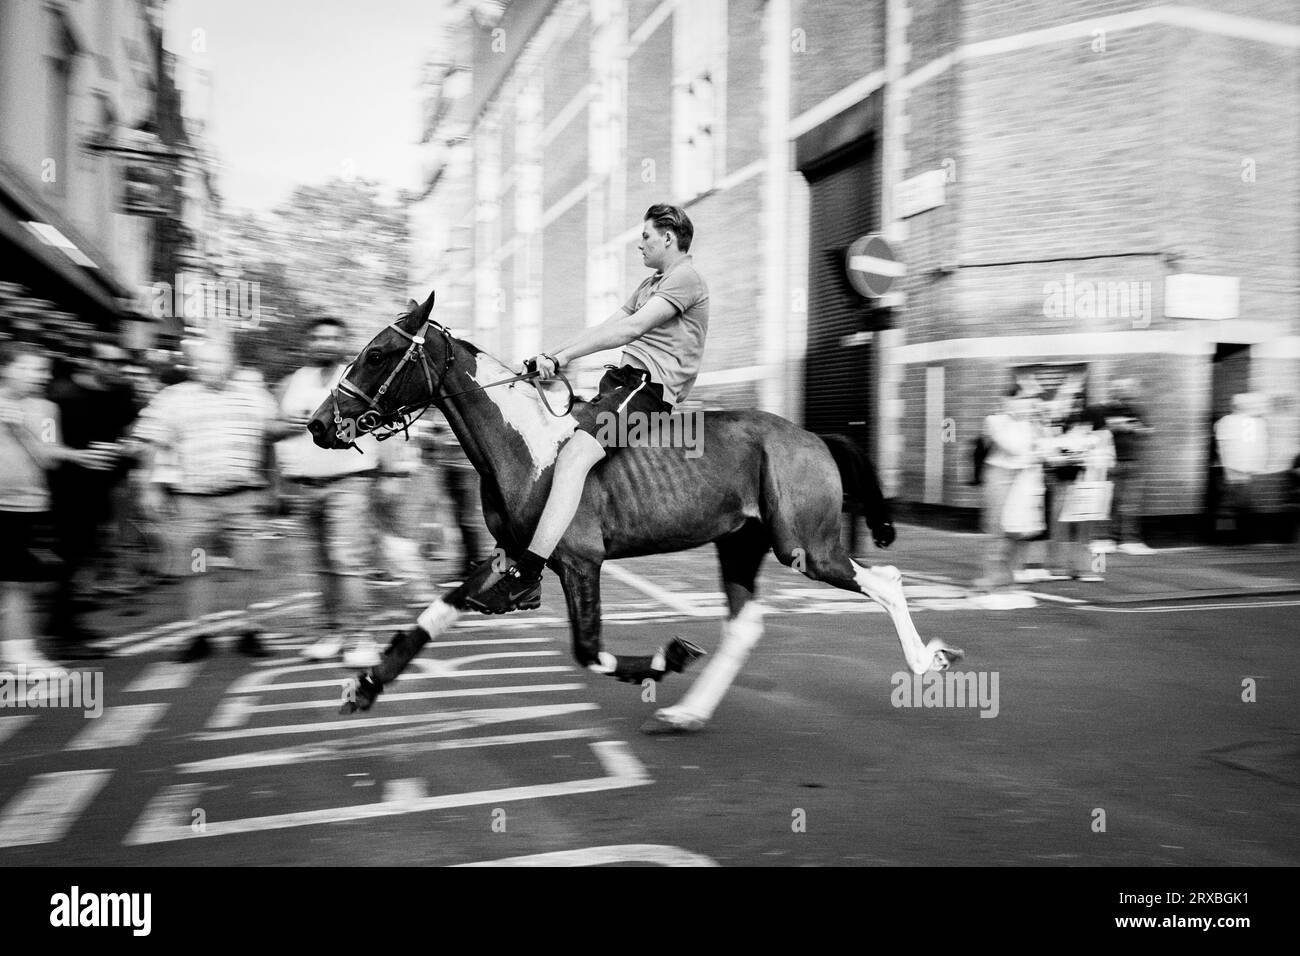 London black and white street photography: A youth rides a horse along Greek street in Soho, London, UK. Stock Photo